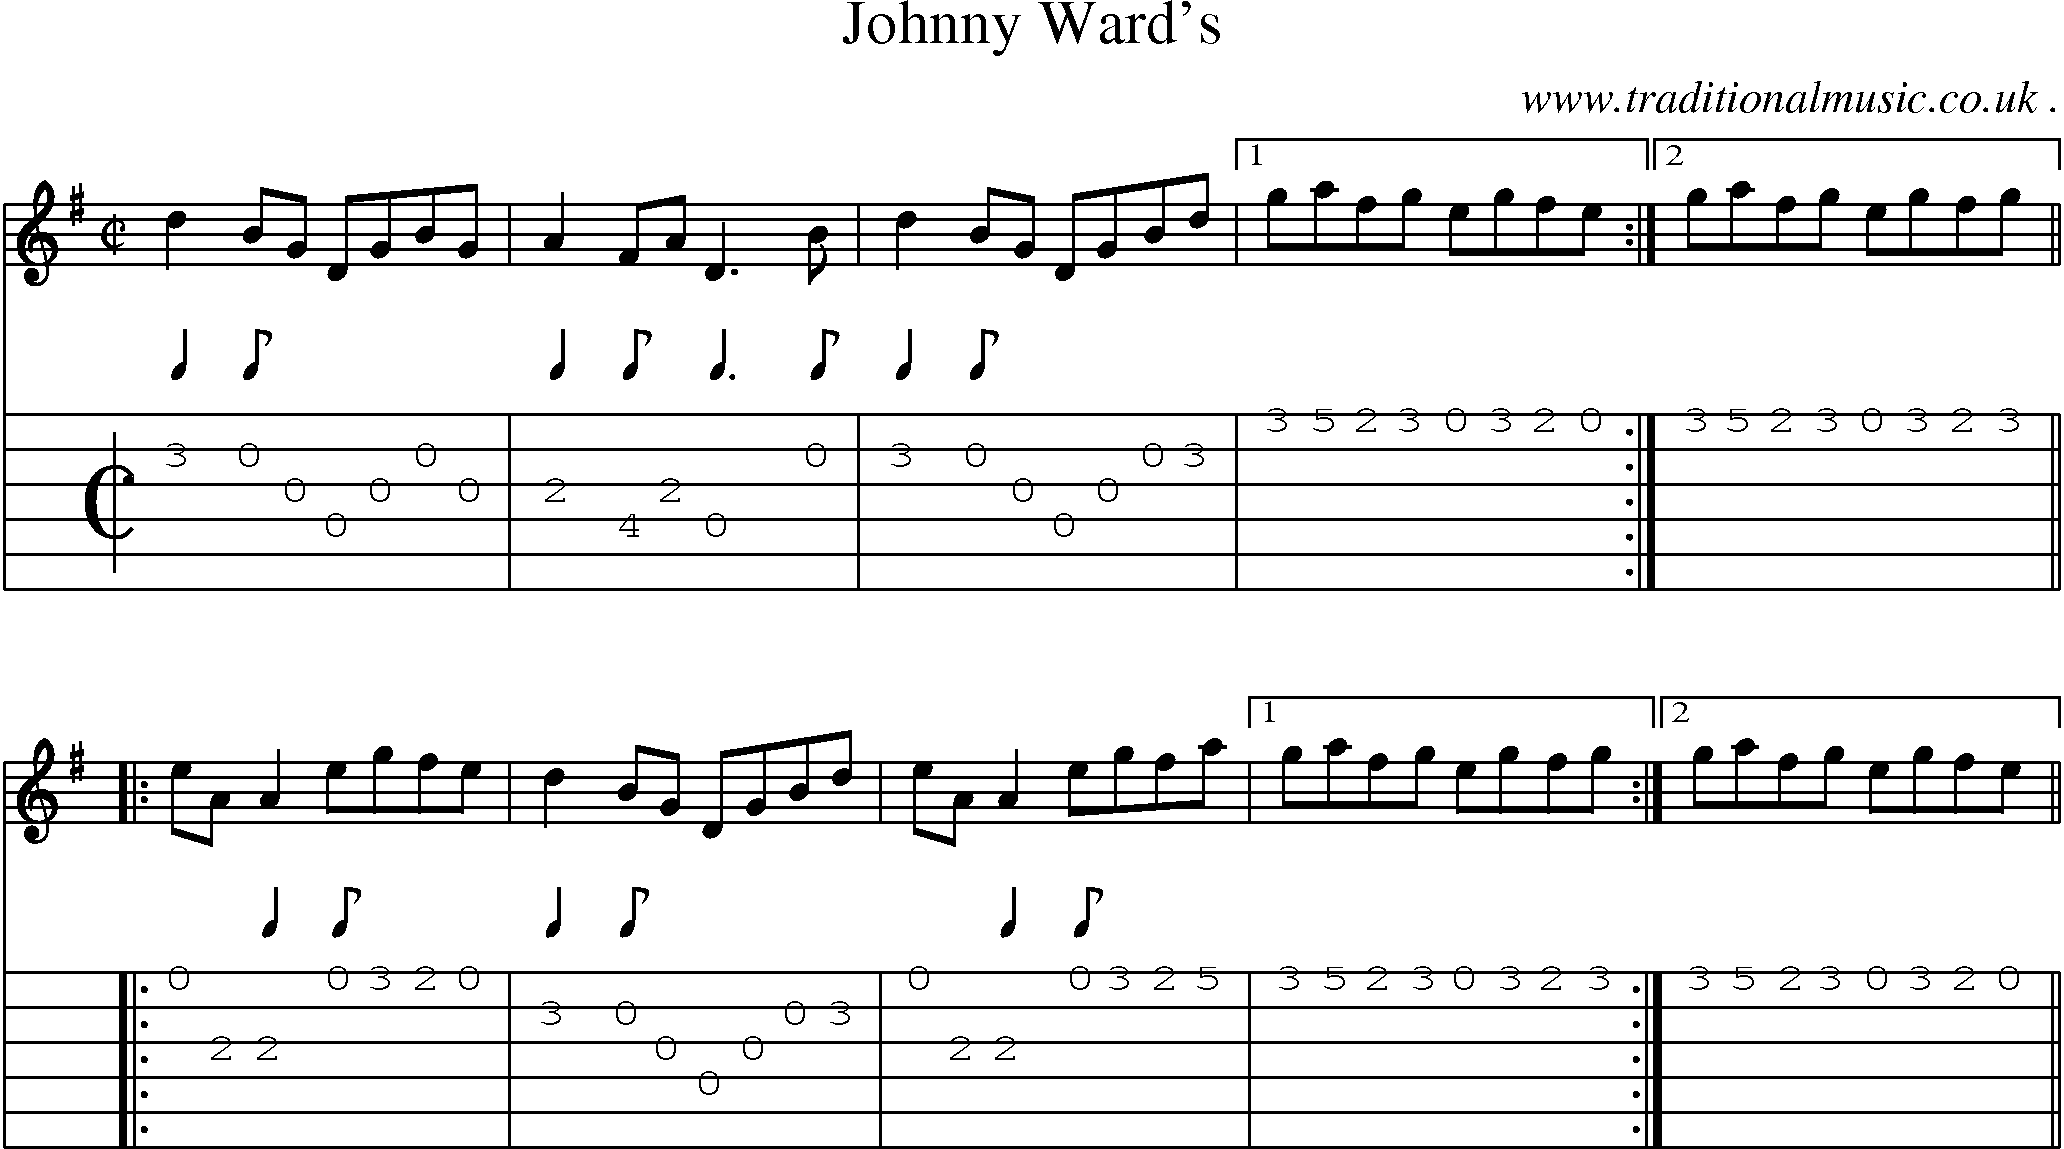 Sheet-Music and Guitar Tabs for Johnny Wards